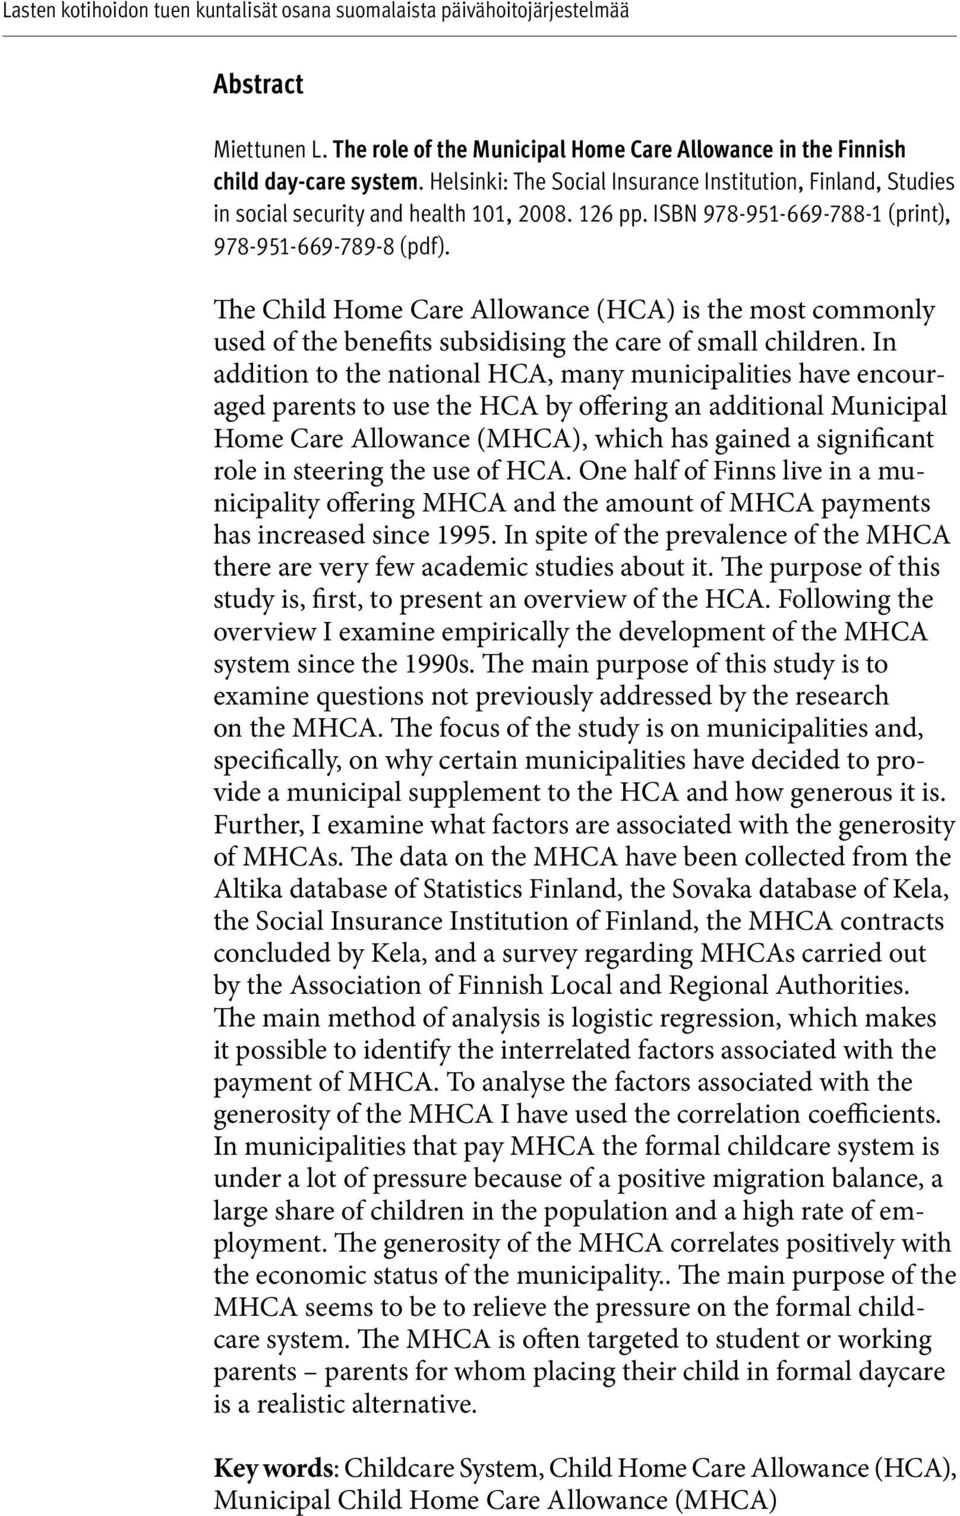 The Child Home Care Allowance (HCA) is the most commonly used of the benefits subsidising the care of small children.